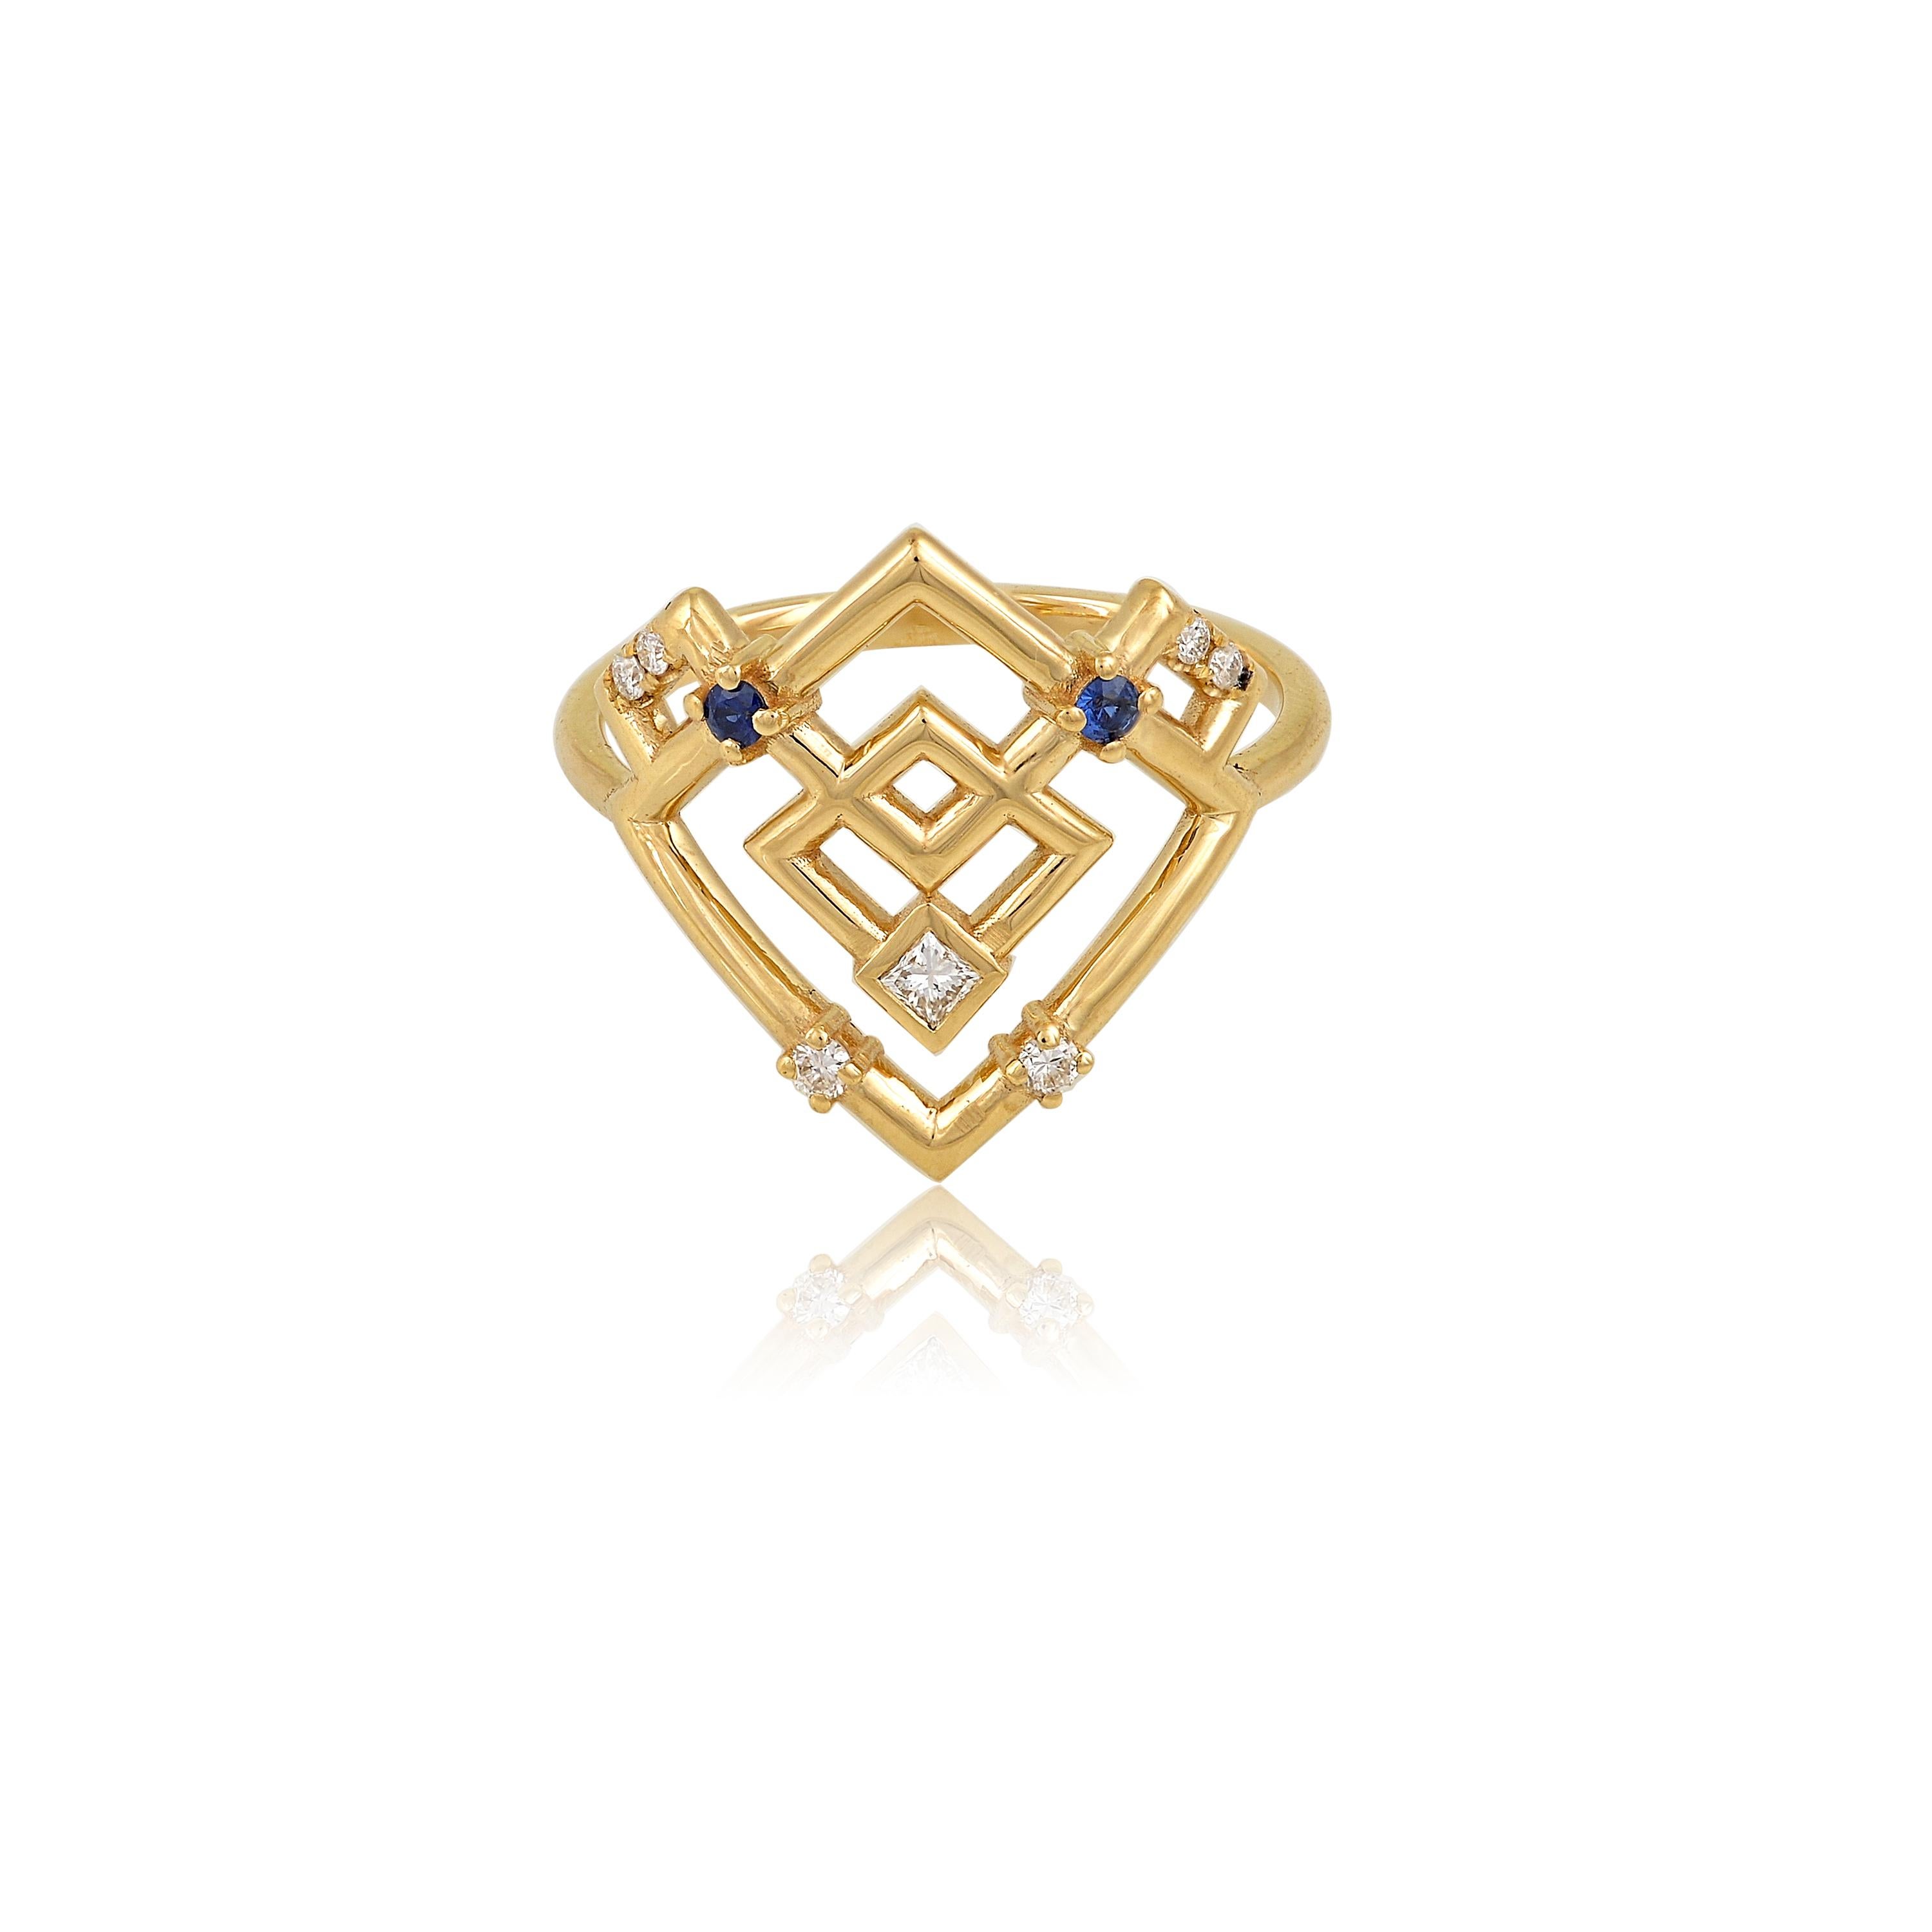 Designer: Alexia Gryllaki
Dimensions: L20x18mm
Ring Size: UK N 1/2 (USA 7)
Weight: approximately 3.2g 
Barcode: ING040R

The Interlocking Geometry ring in 18 karat yellow gold with sapphires approx. 0.08cts, princess-cut and round brilliant-cut